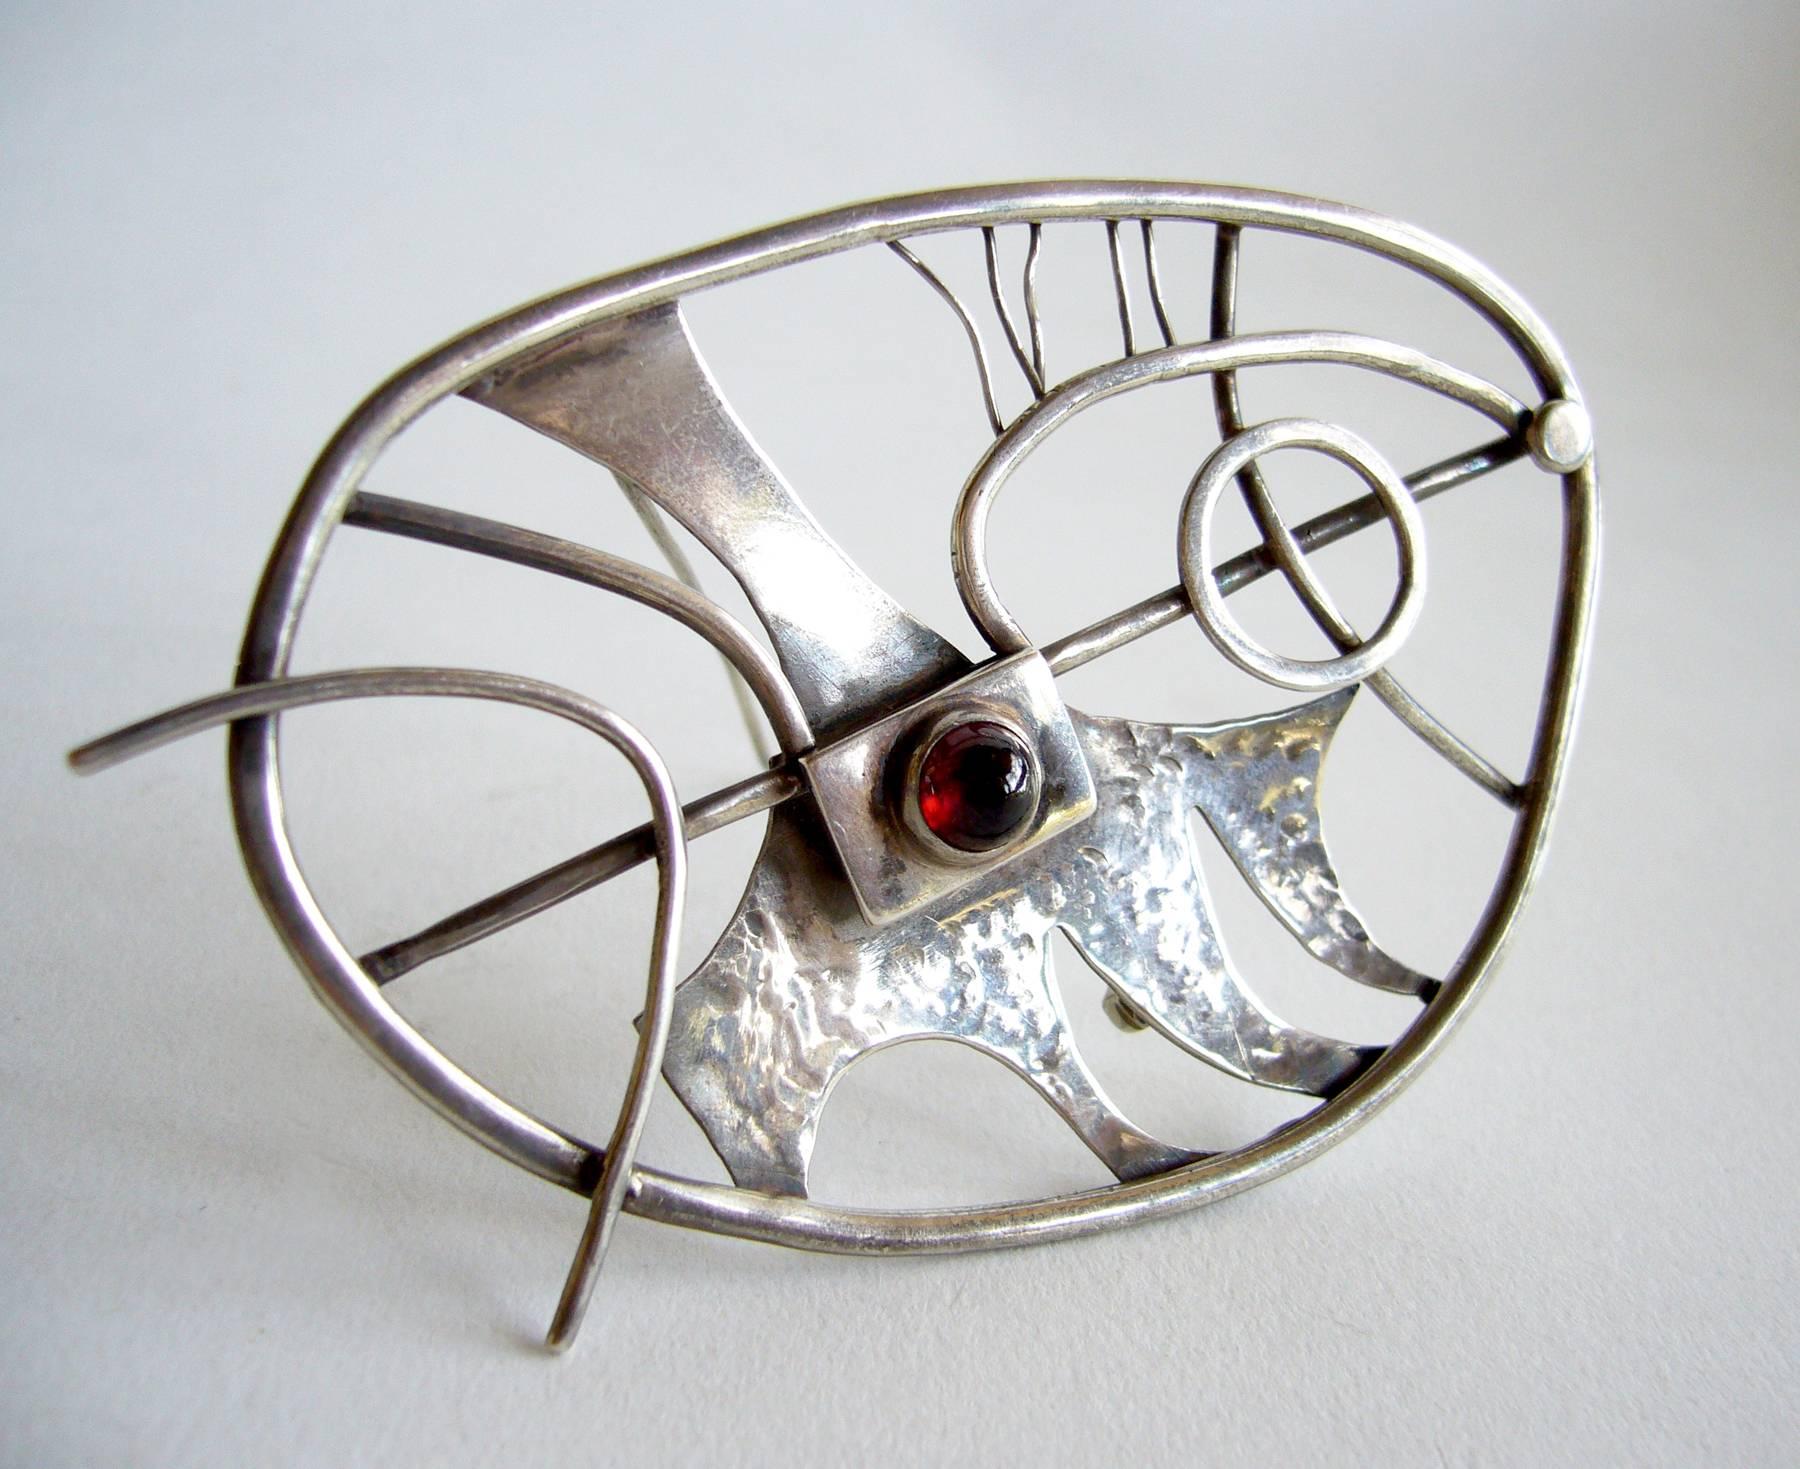 Large abstract modernist sterling silver and garnet brooch, American, circa 1950's.  Brooch measures 2.25